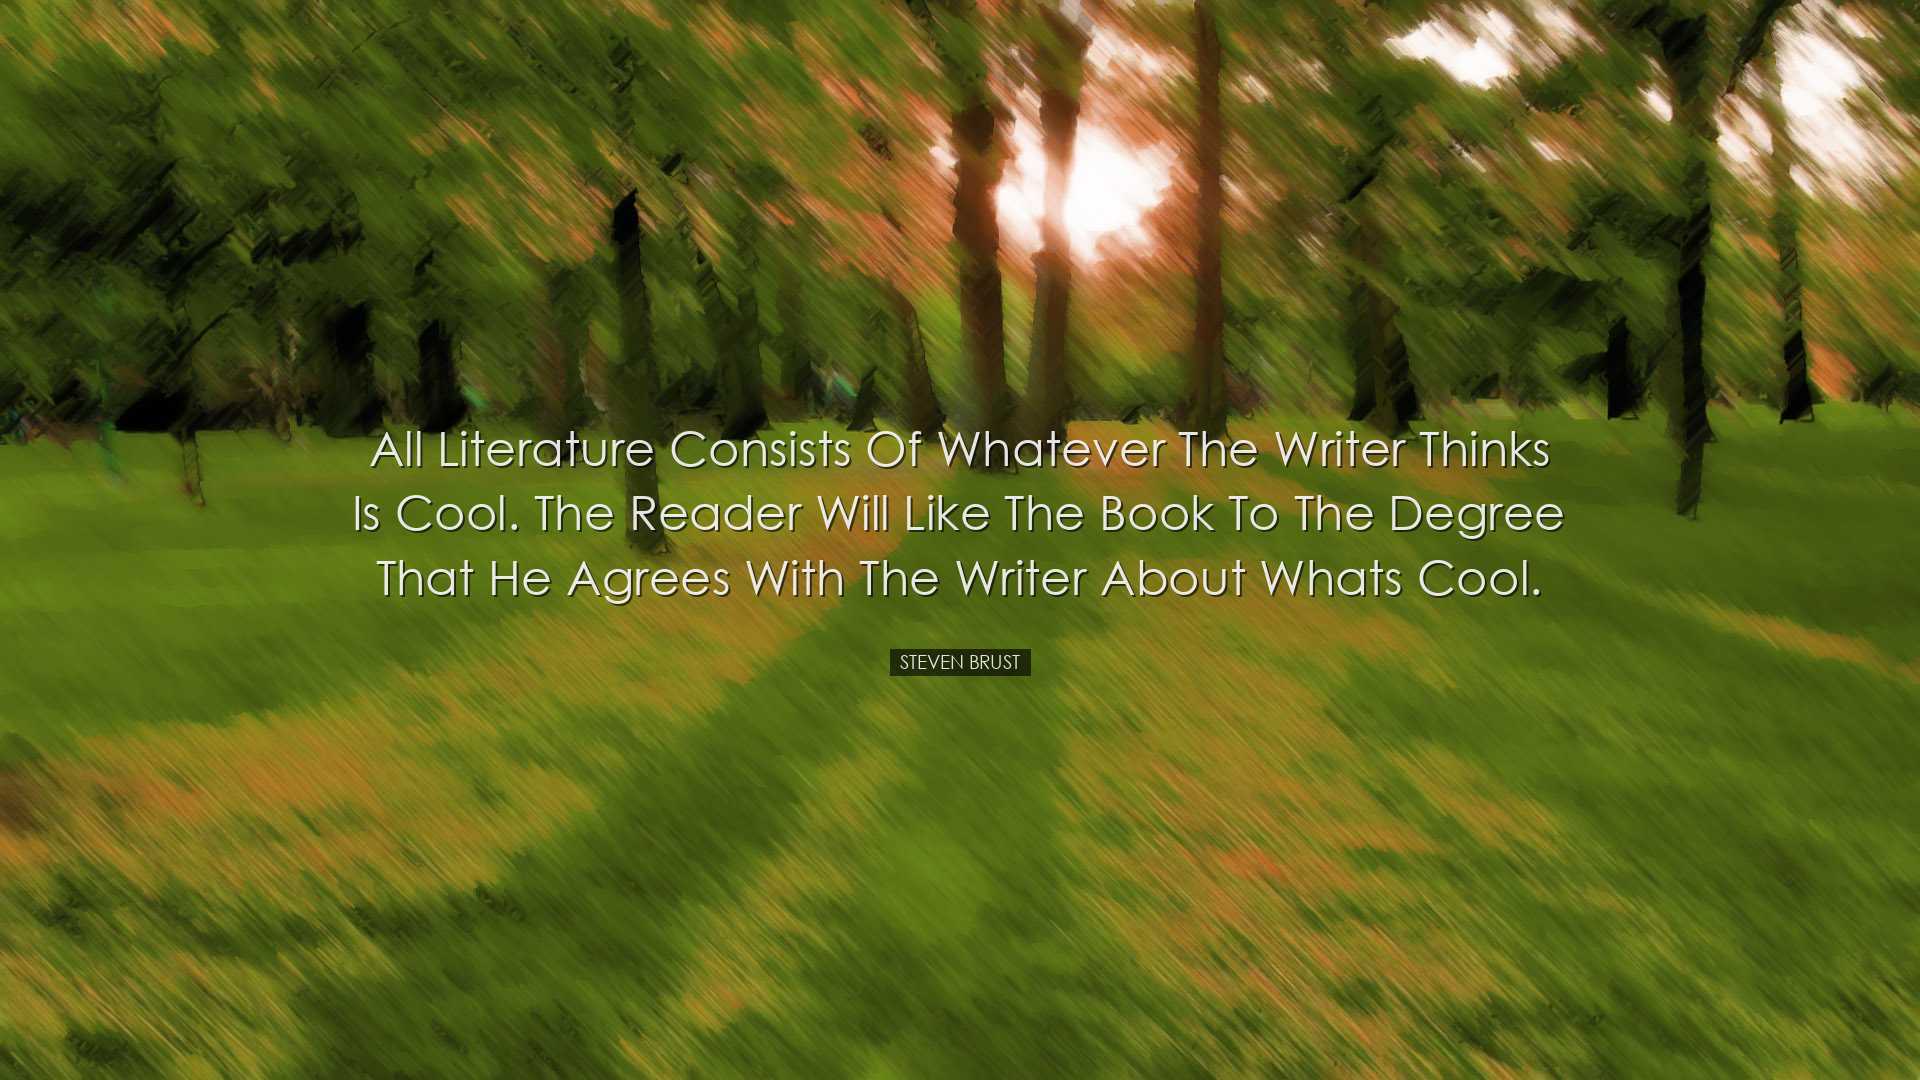 All literature consists of whatever the writer thinks is cool. The